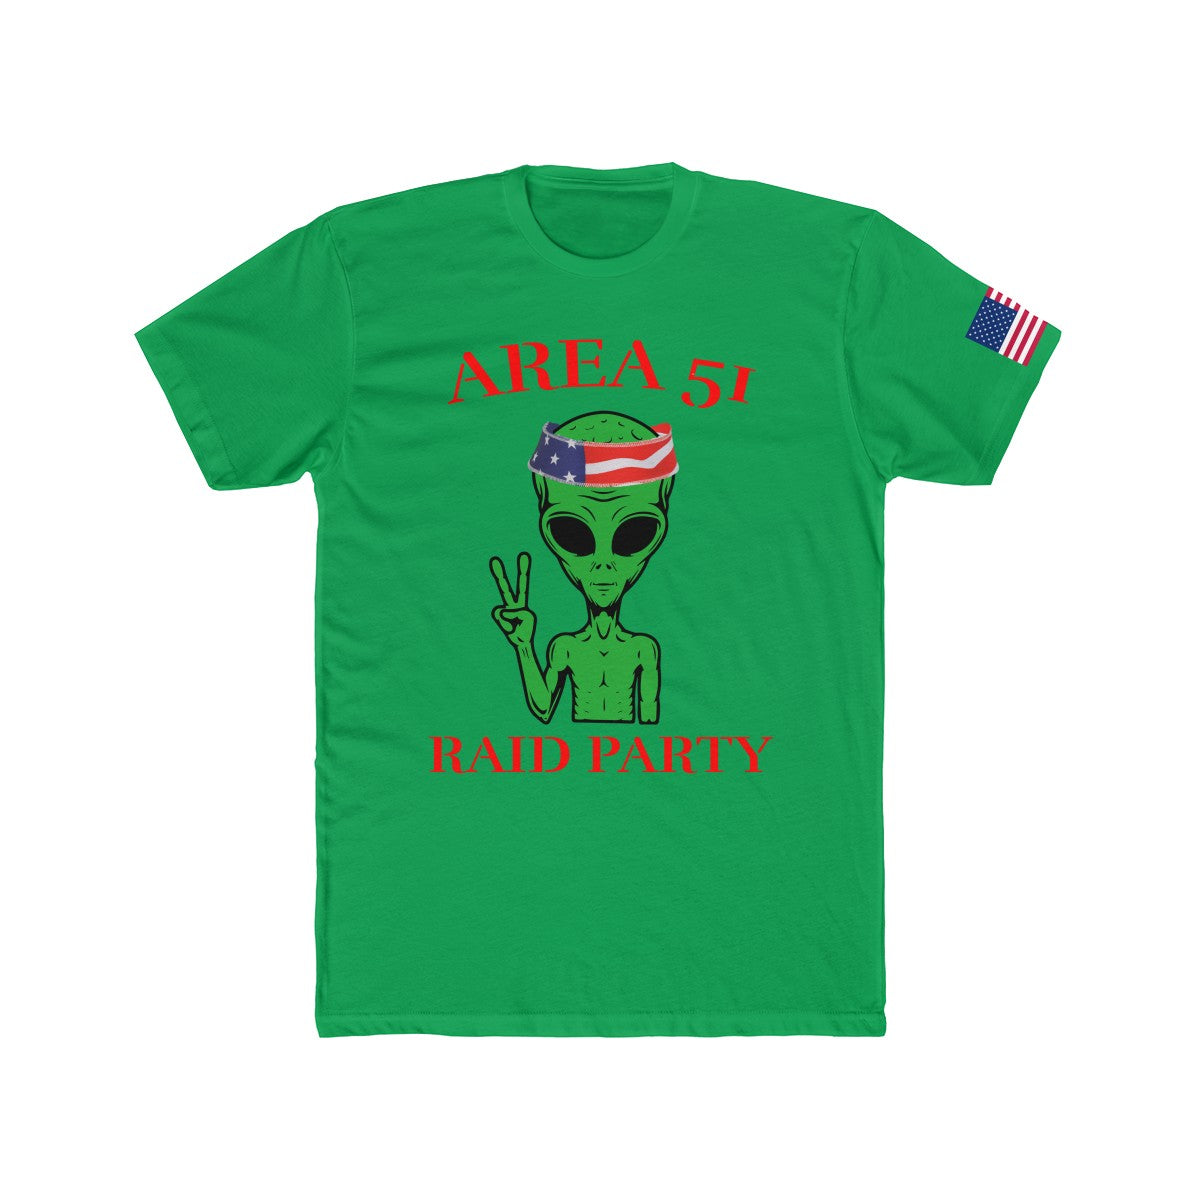 Official Area 51 Raid Party Tee